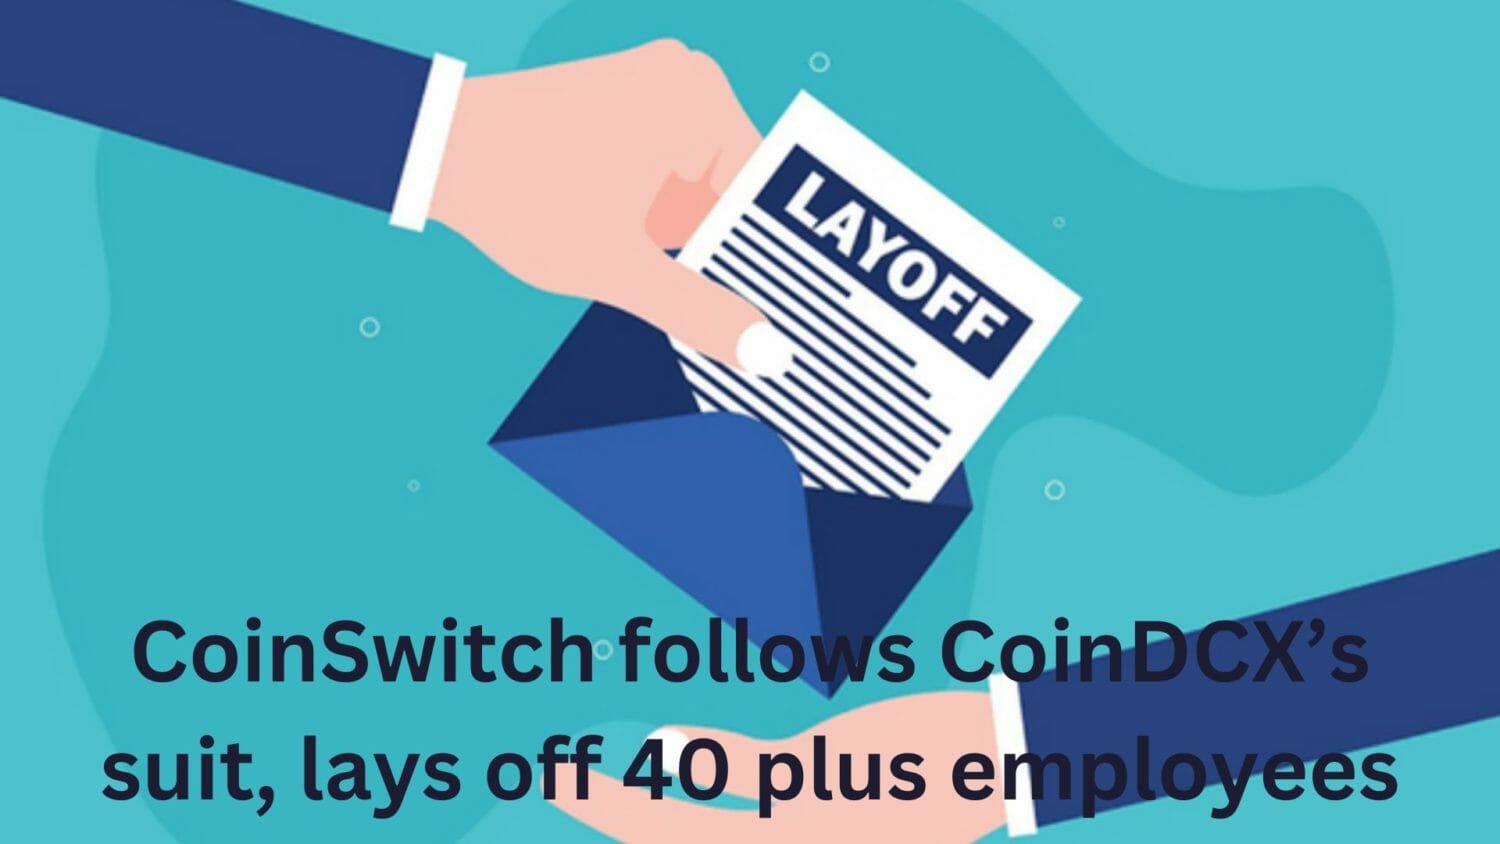 Coinswitch Follows Coindcx’ Suit, Lays Off 40 Plus Employees